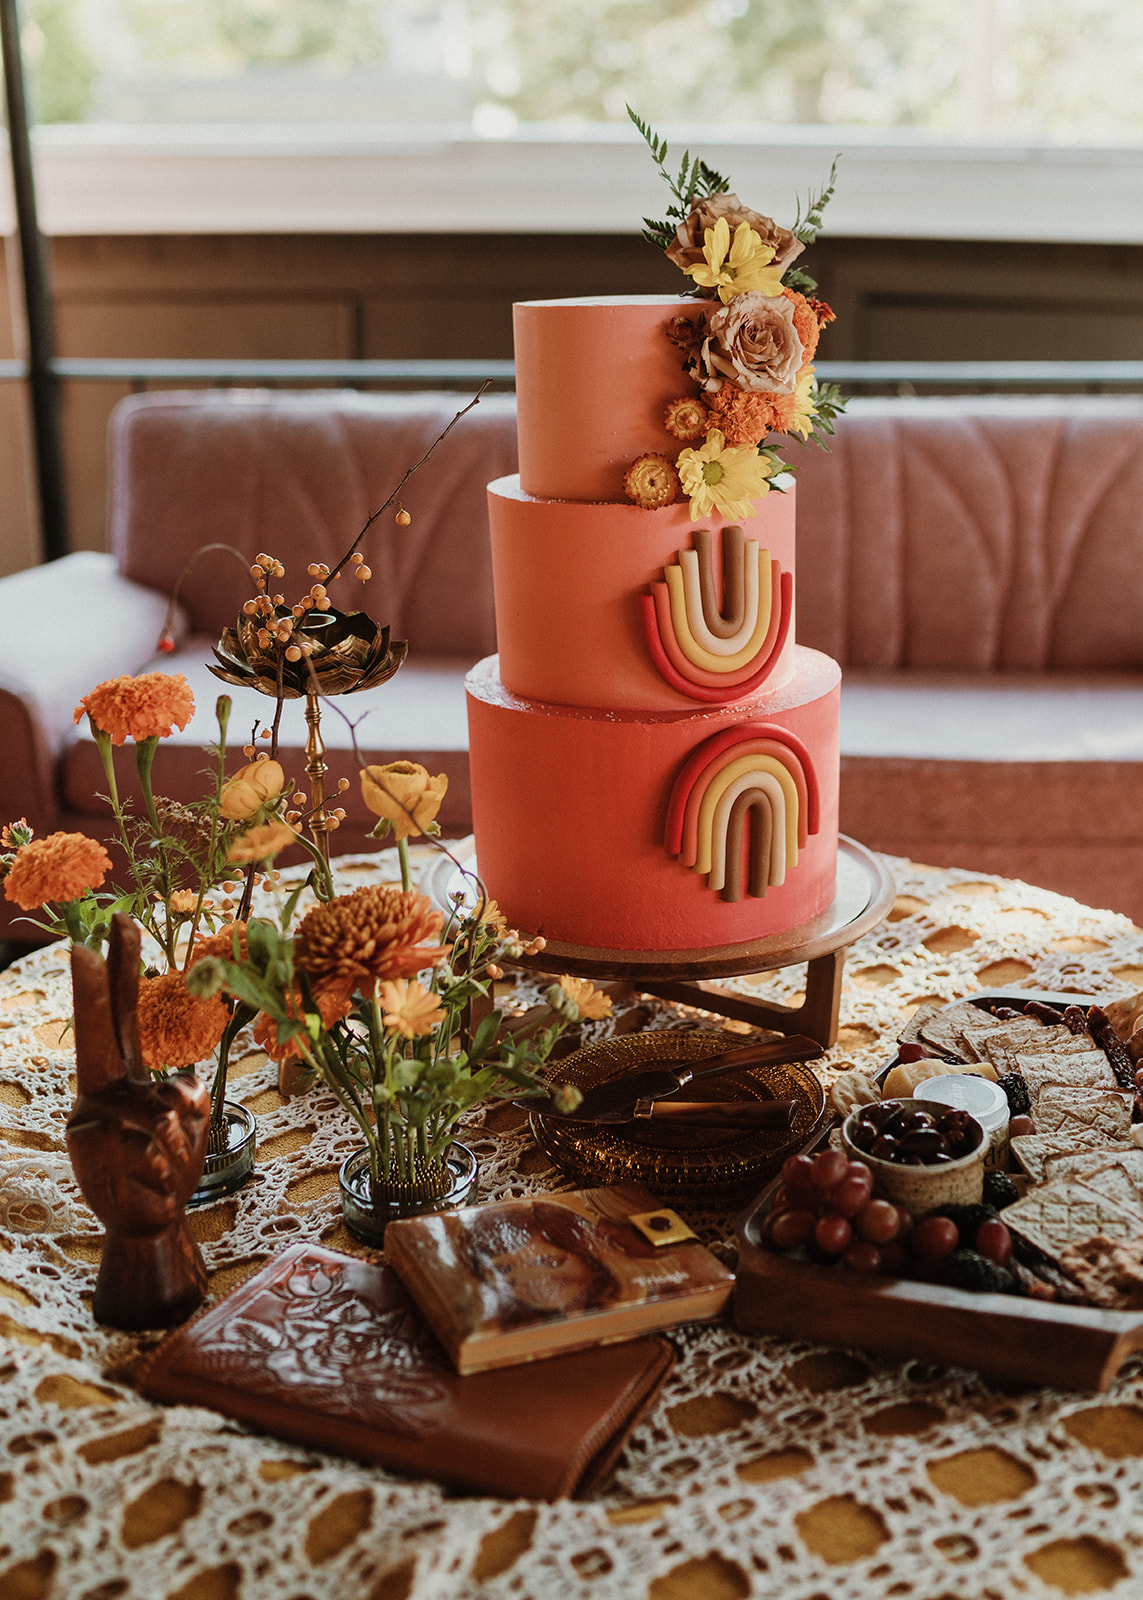 Groovy retro inspired pink and tangerine wedding cake from an Anthropologie dream 